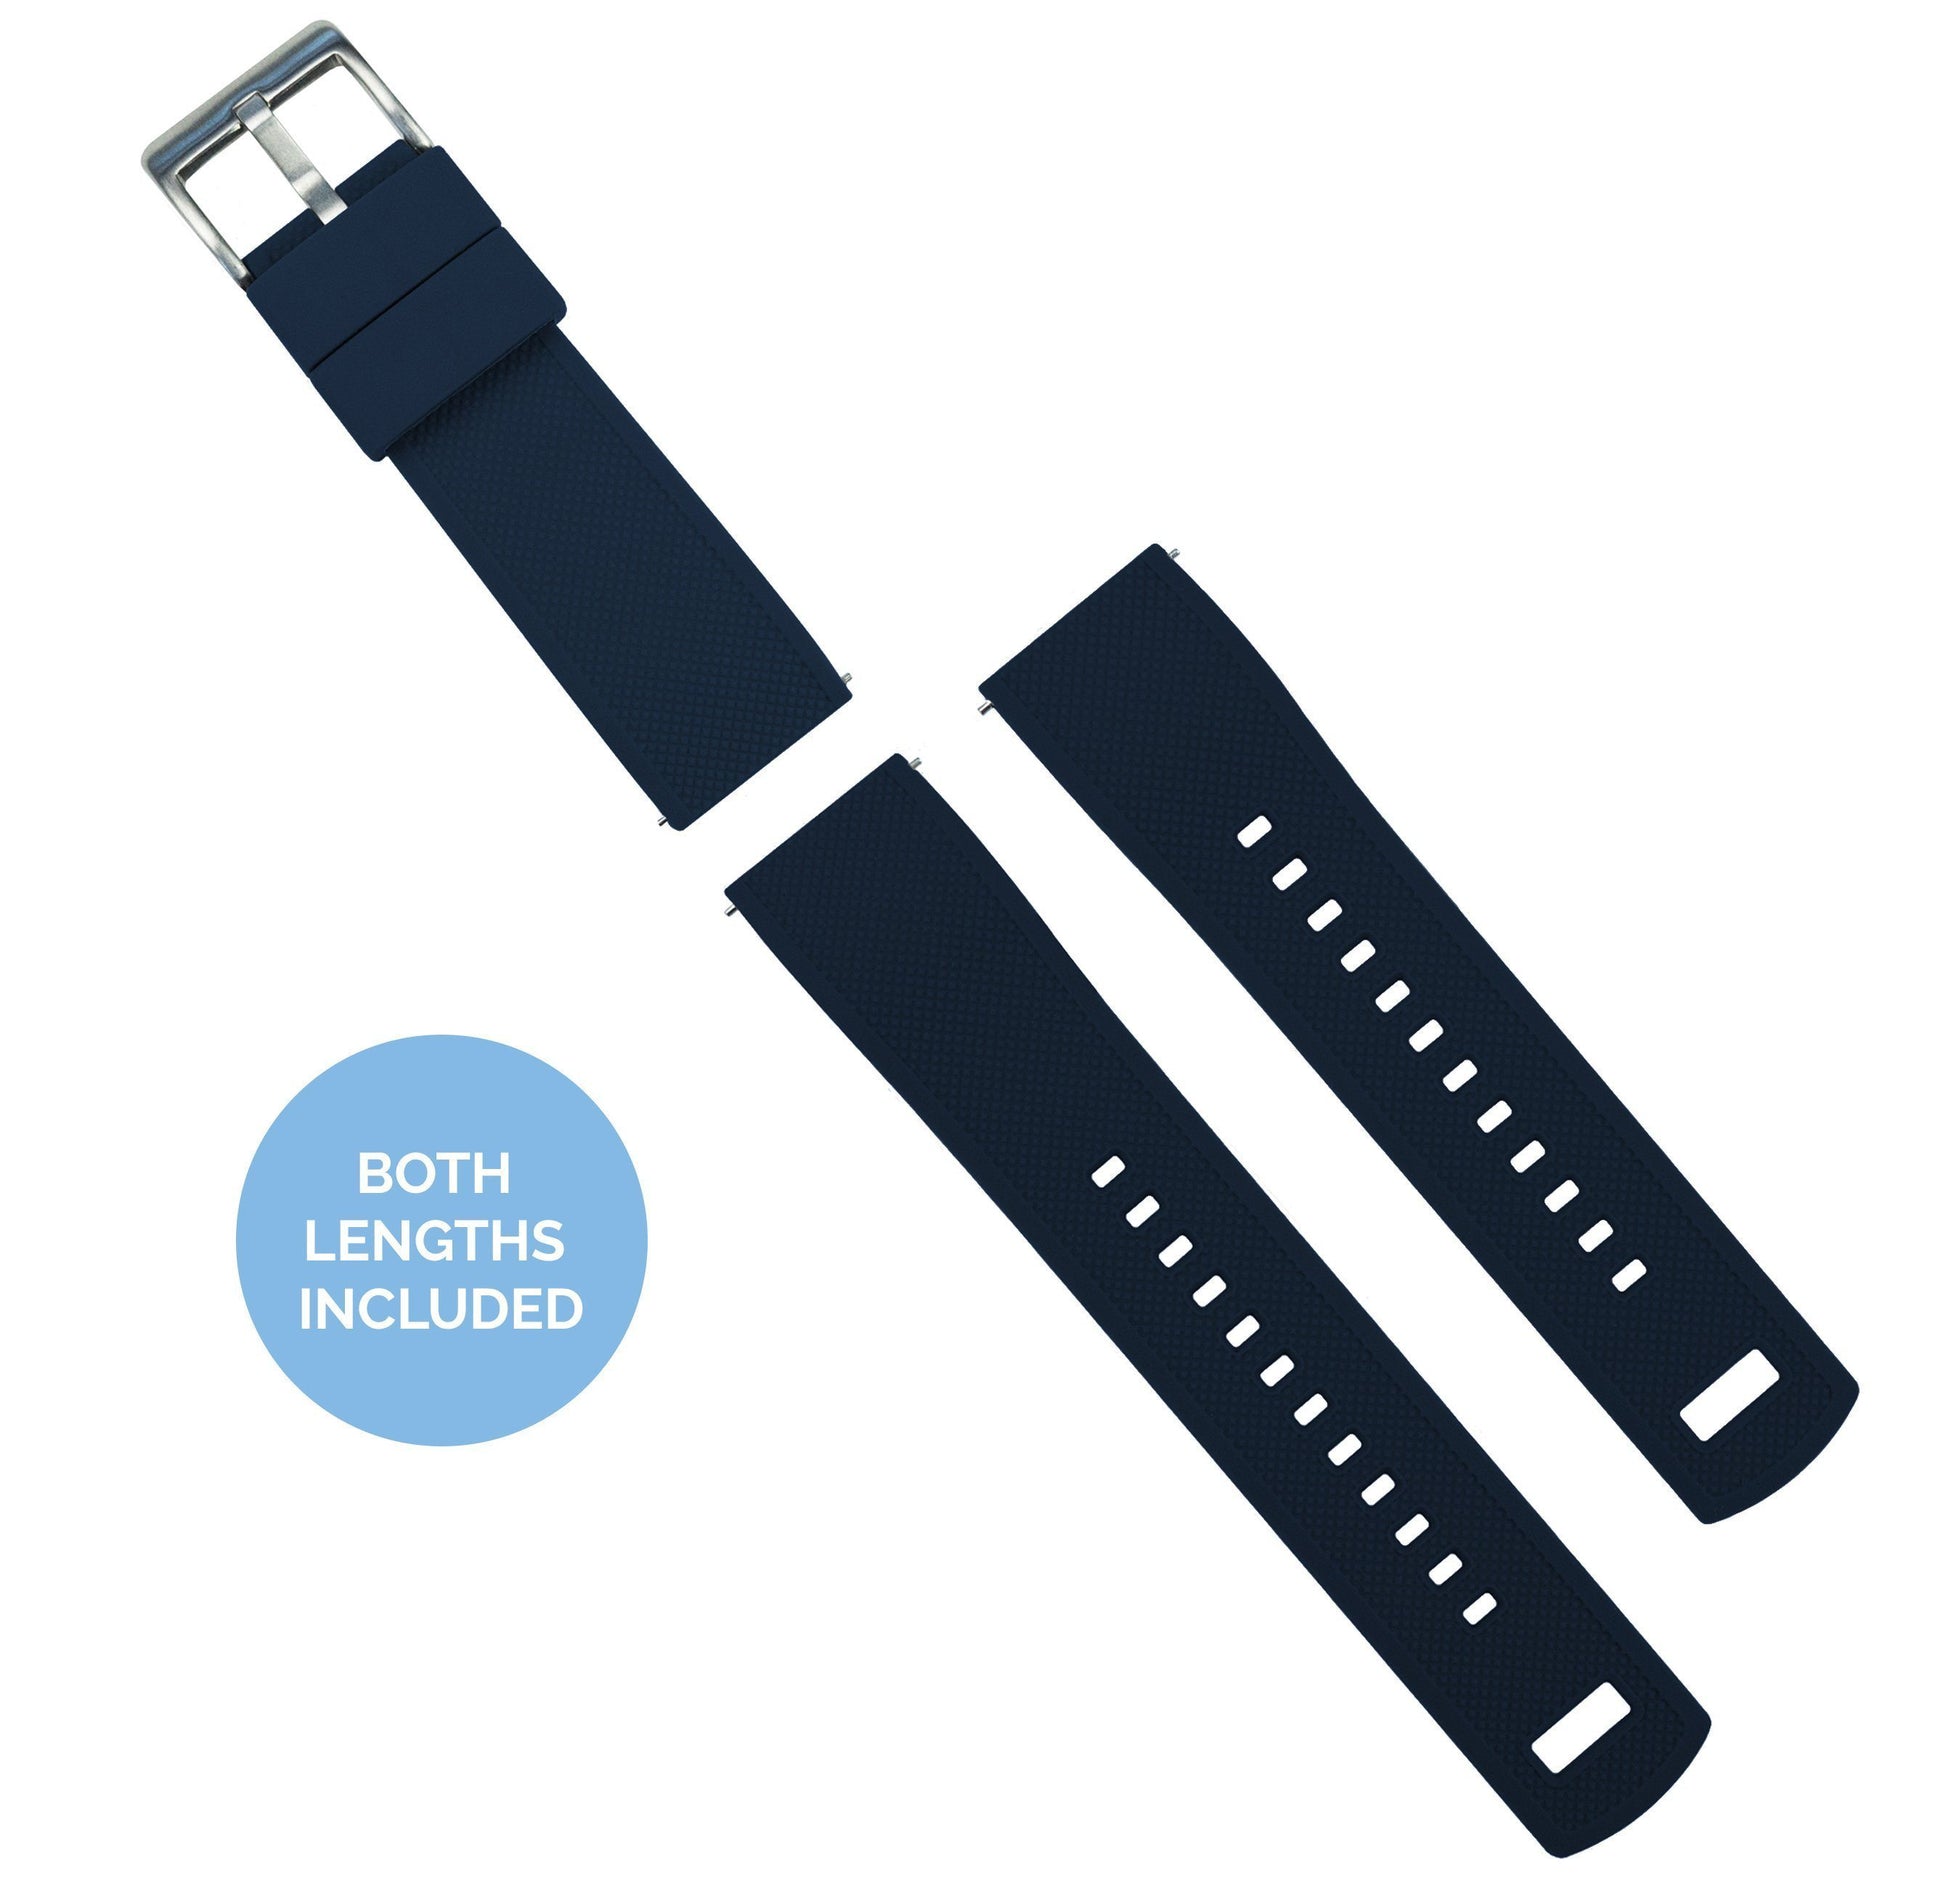 Fossil Q | Elite Silicone | Navy Blue - Barton Watch Bands